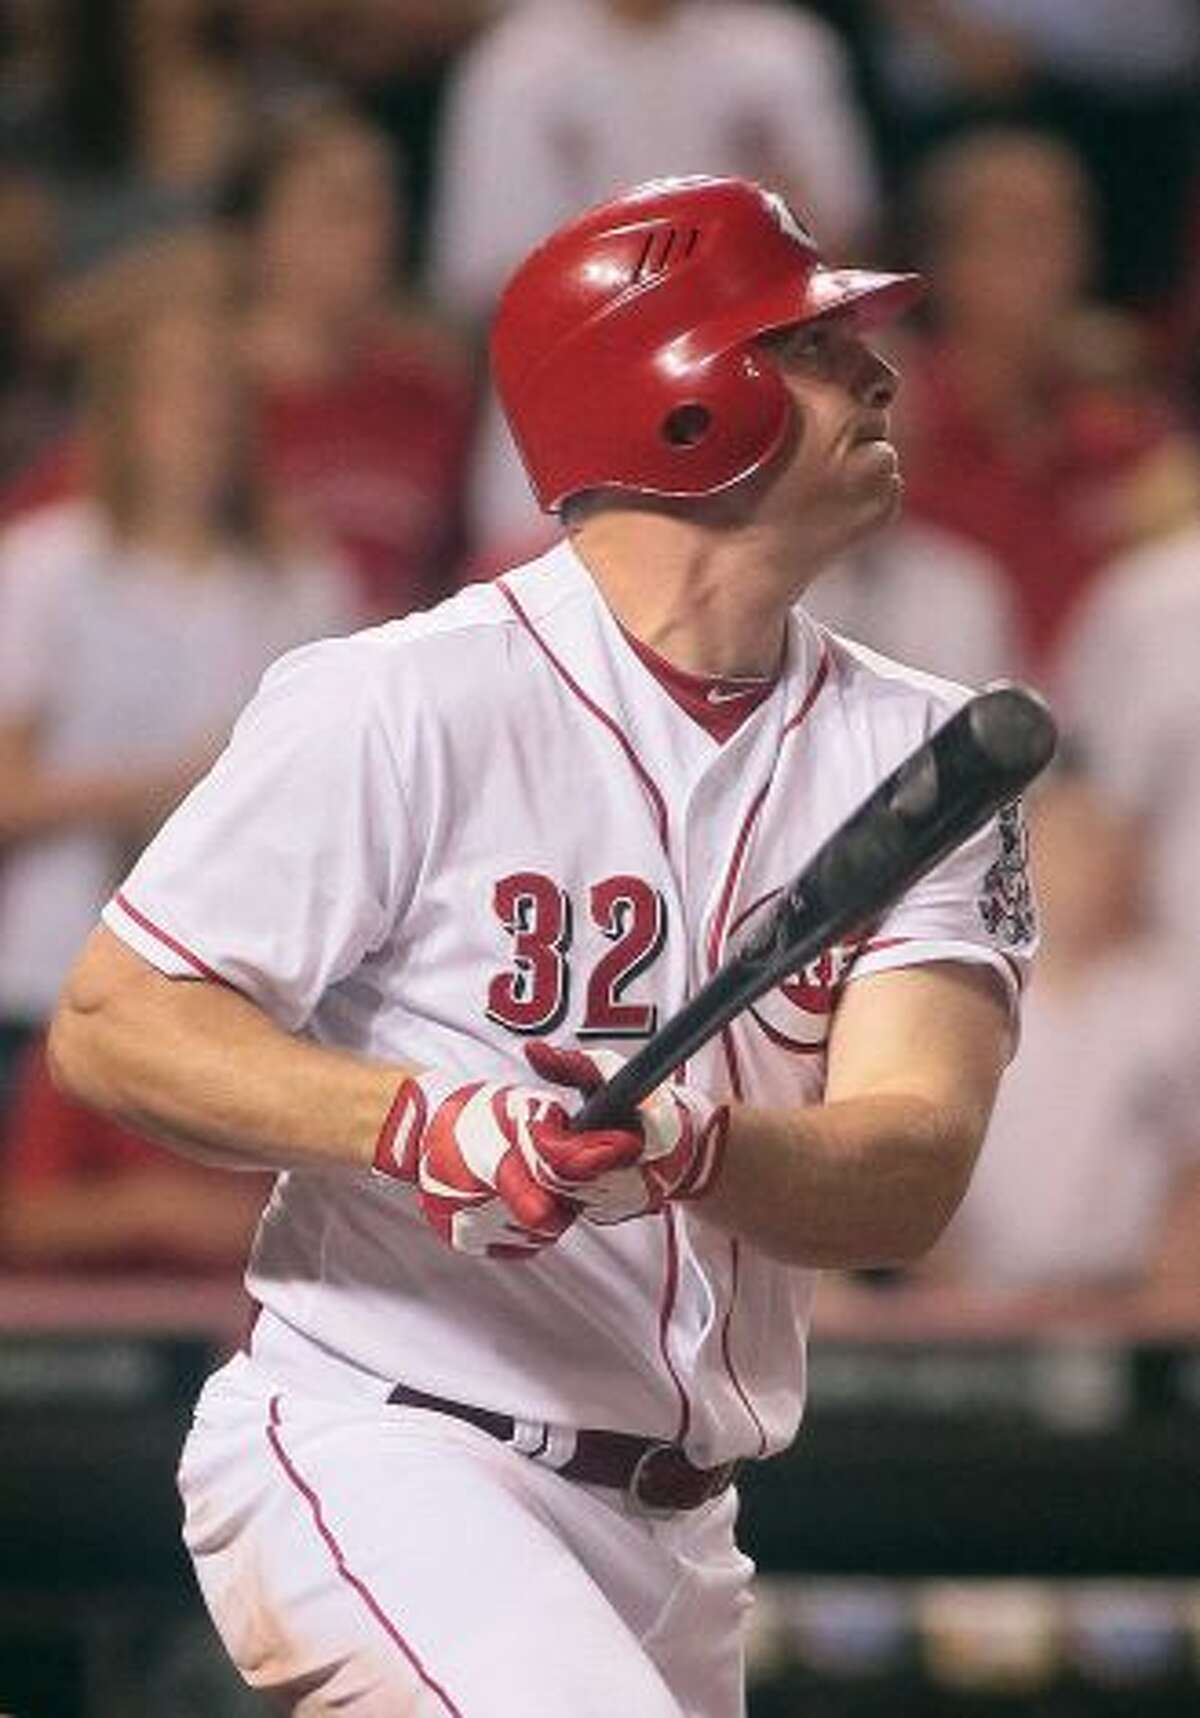 Cincinnati Reds' Jay Bruce watches his three-run home run off of New York Mets reliever Josh Edgin scoring Brandon Phillips and Ryan Ludwig in the ninth inning of a baseball game, Tuesday, Aug. 14, 2012, in Cincinnati. The Red won 3-0. Photo: Tony Tribble / AP